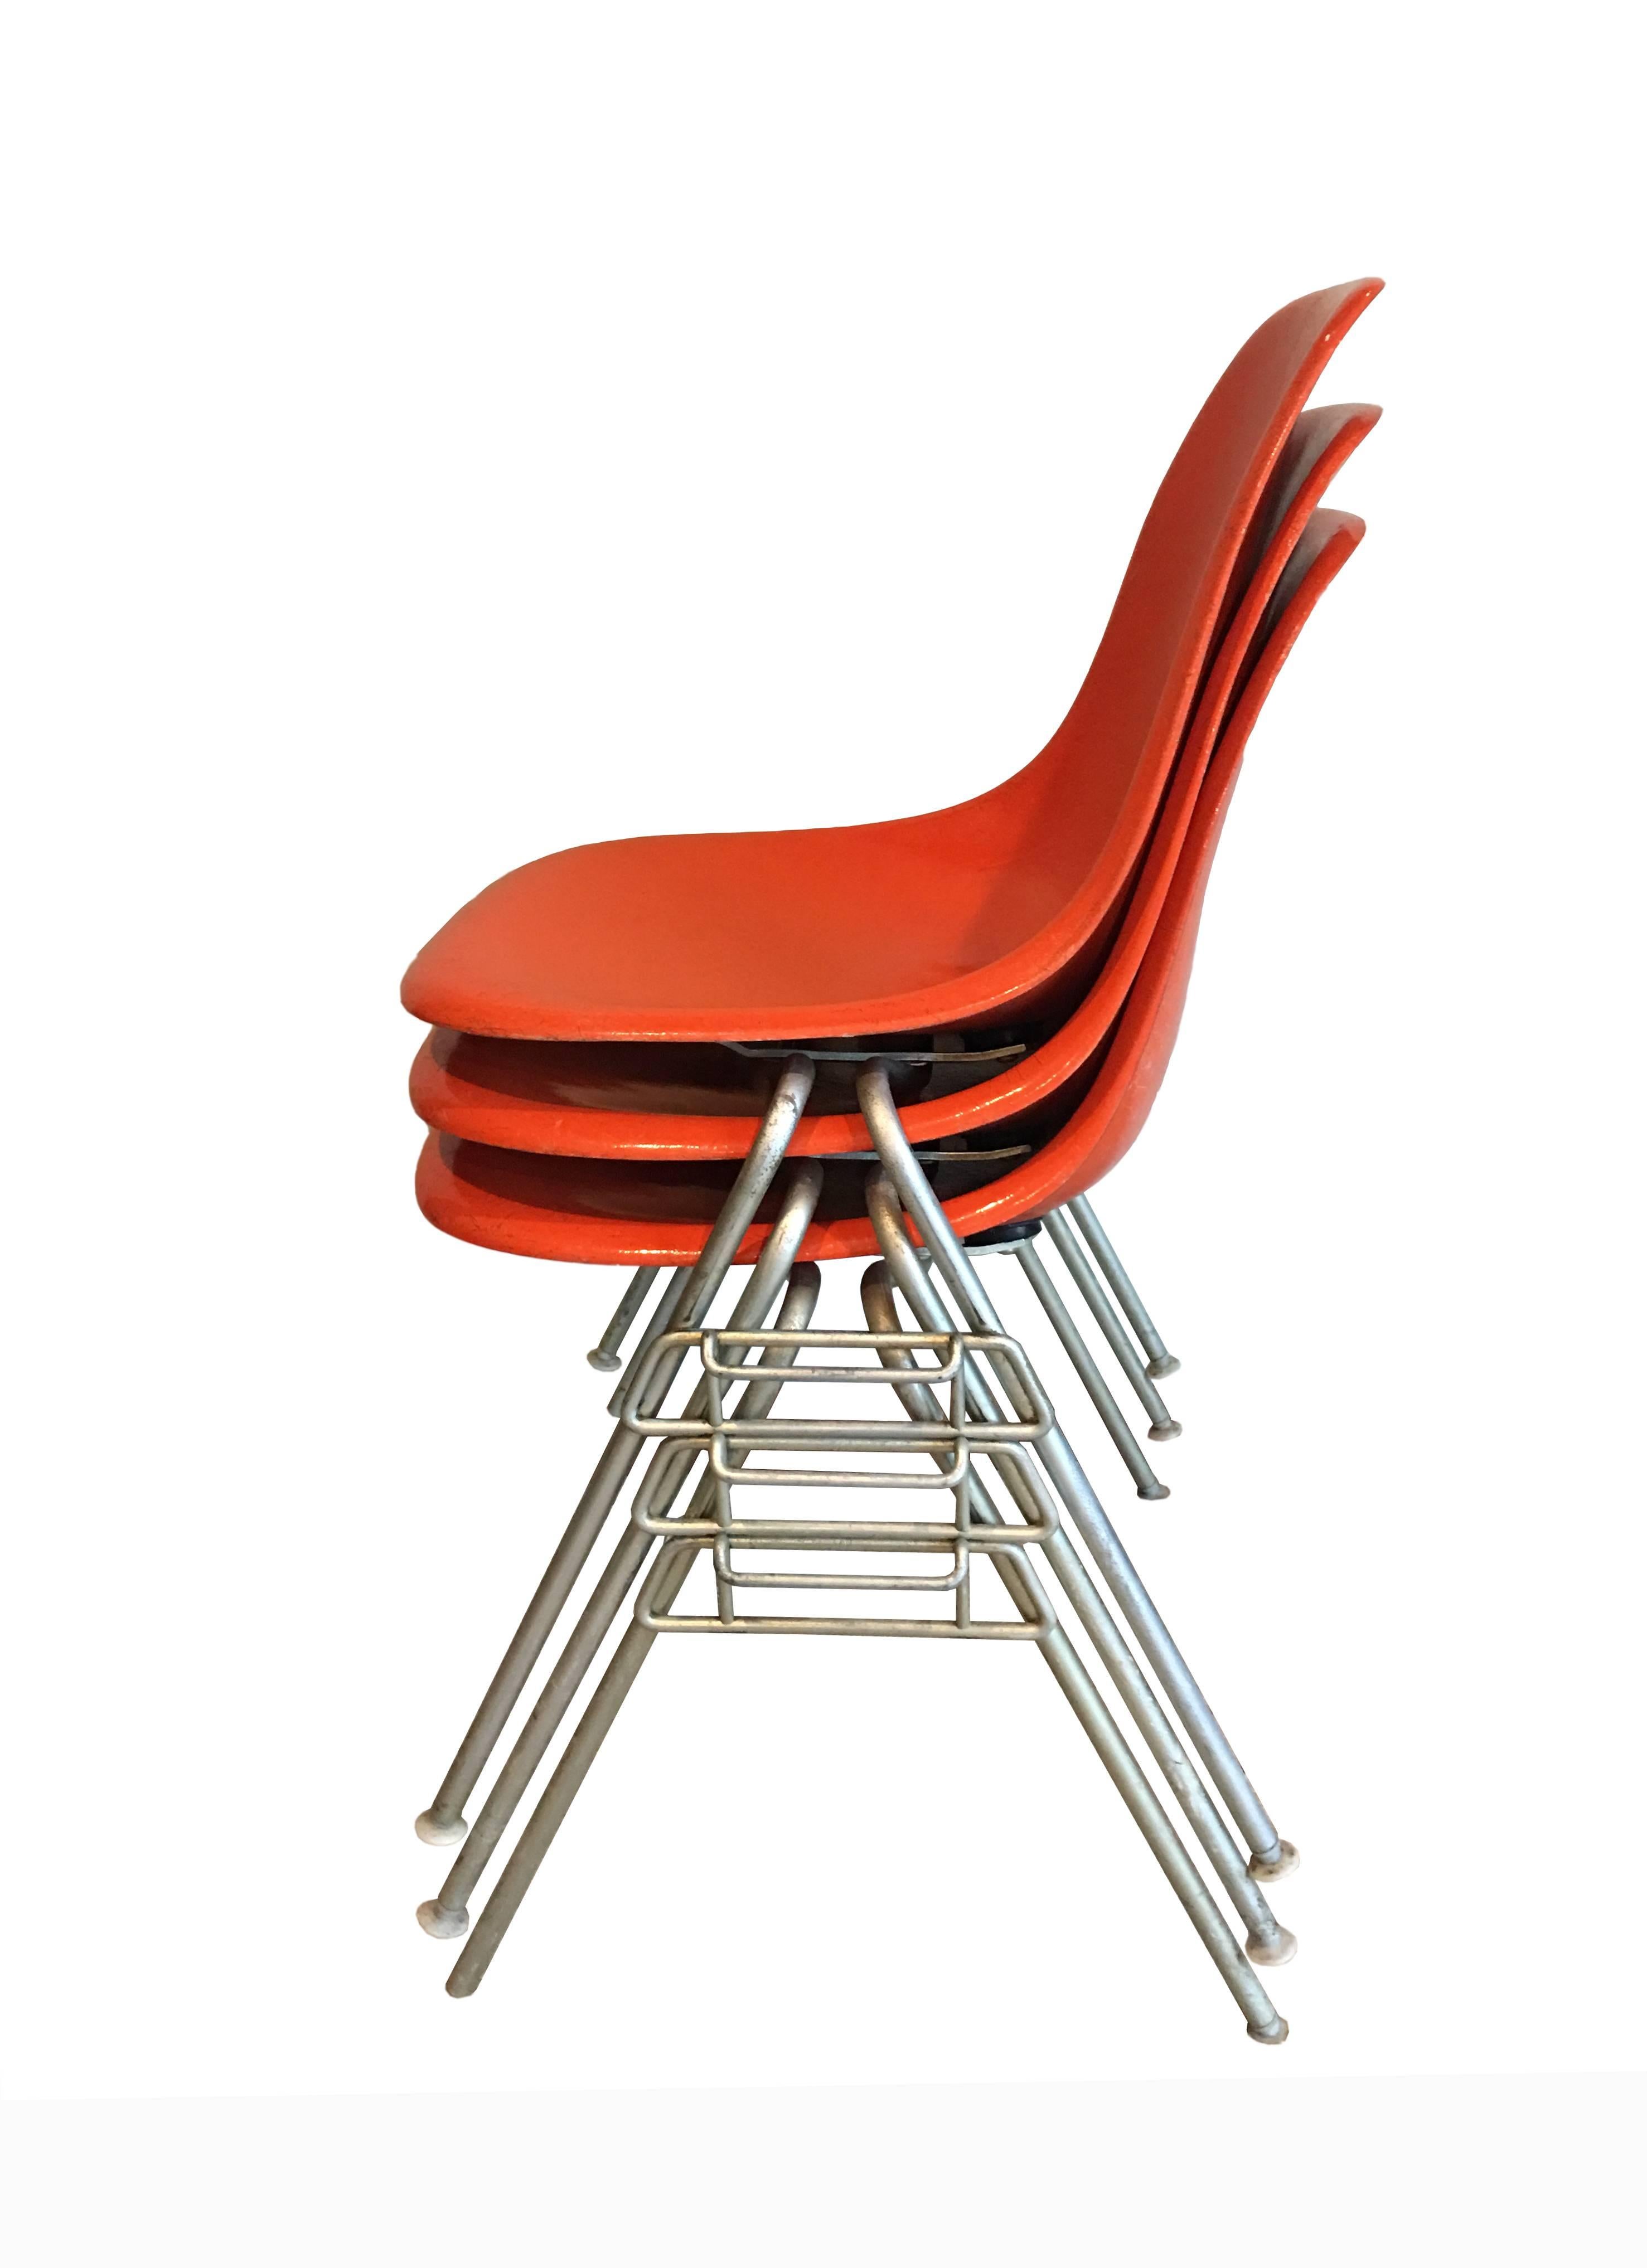 Stackable, orange Herman Miller chairs designed by Charles and Ray Eames. A timeless Classic designed to meet a multitude of seating needs. Additional photos available upon request. All chairs are embossed with the Herman Miller logo. The chairs